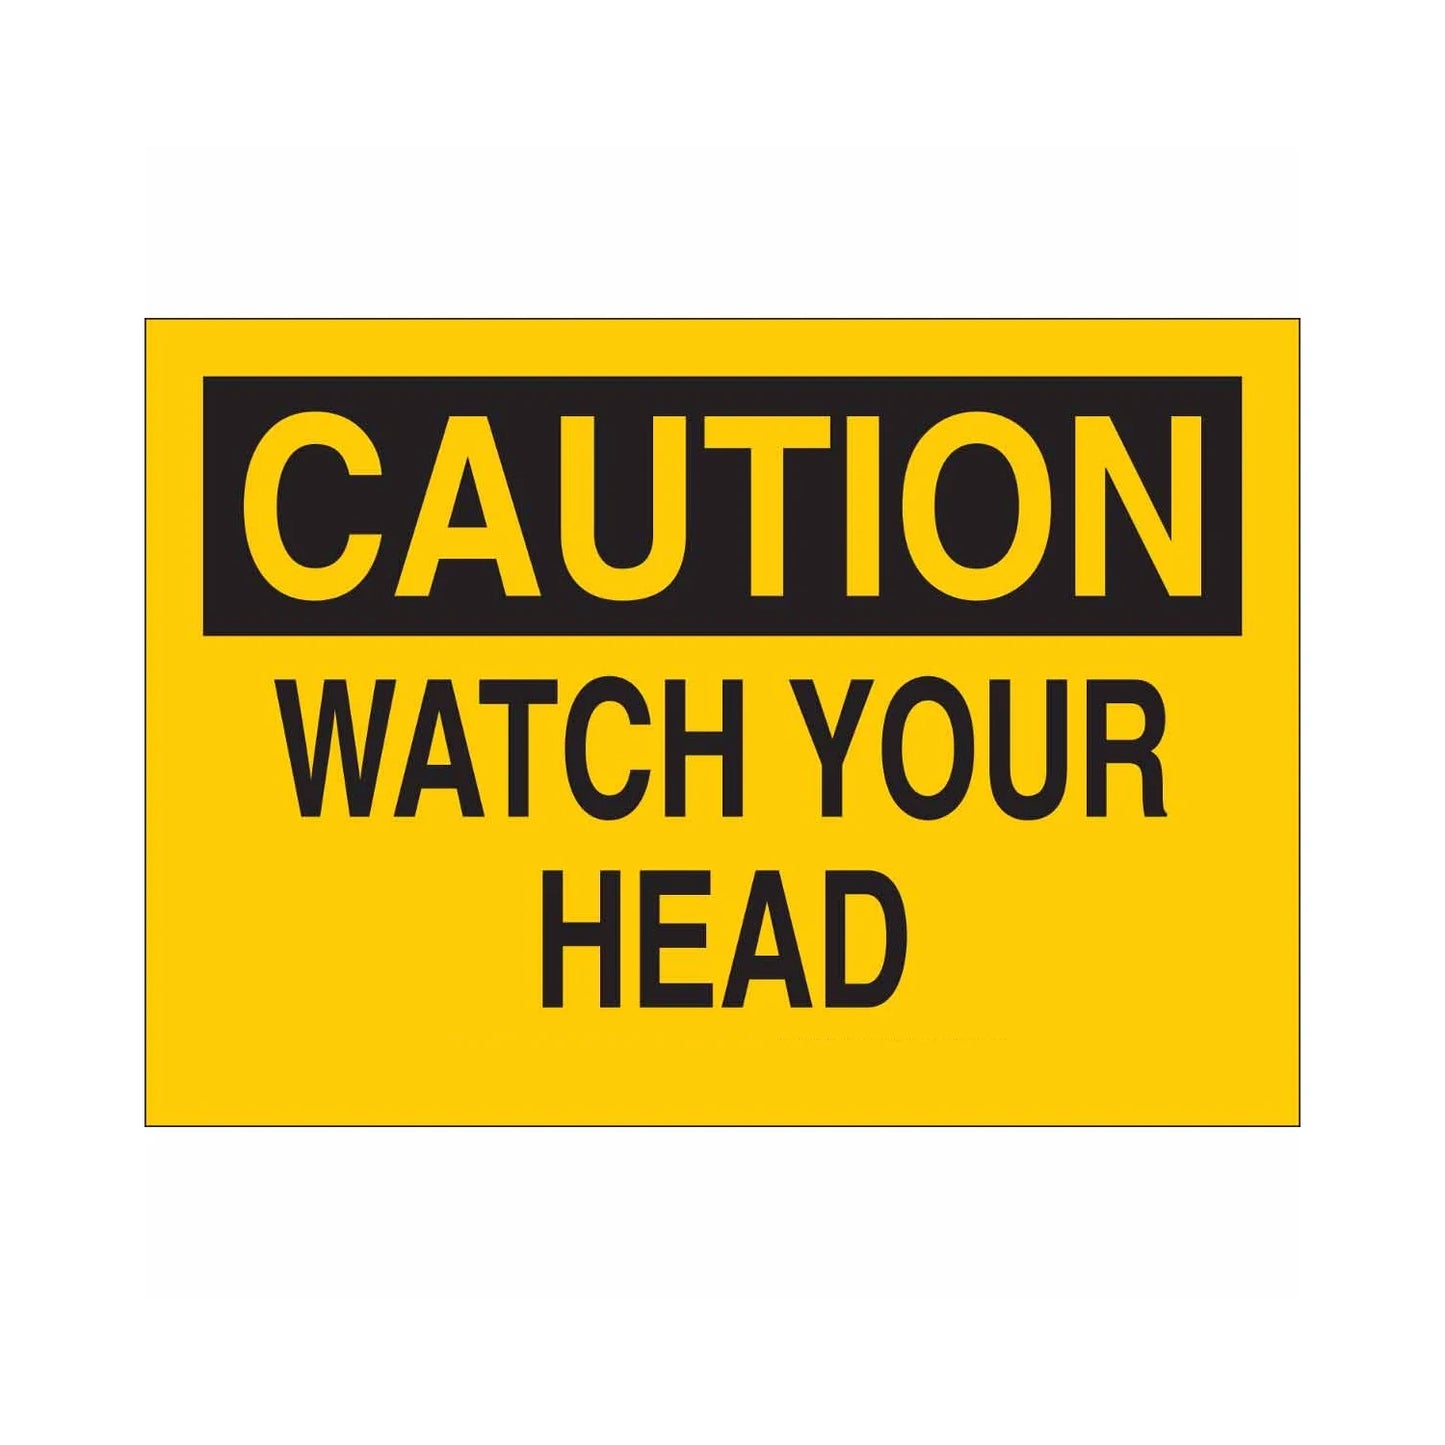 CAUTION Watch Your Head Sign